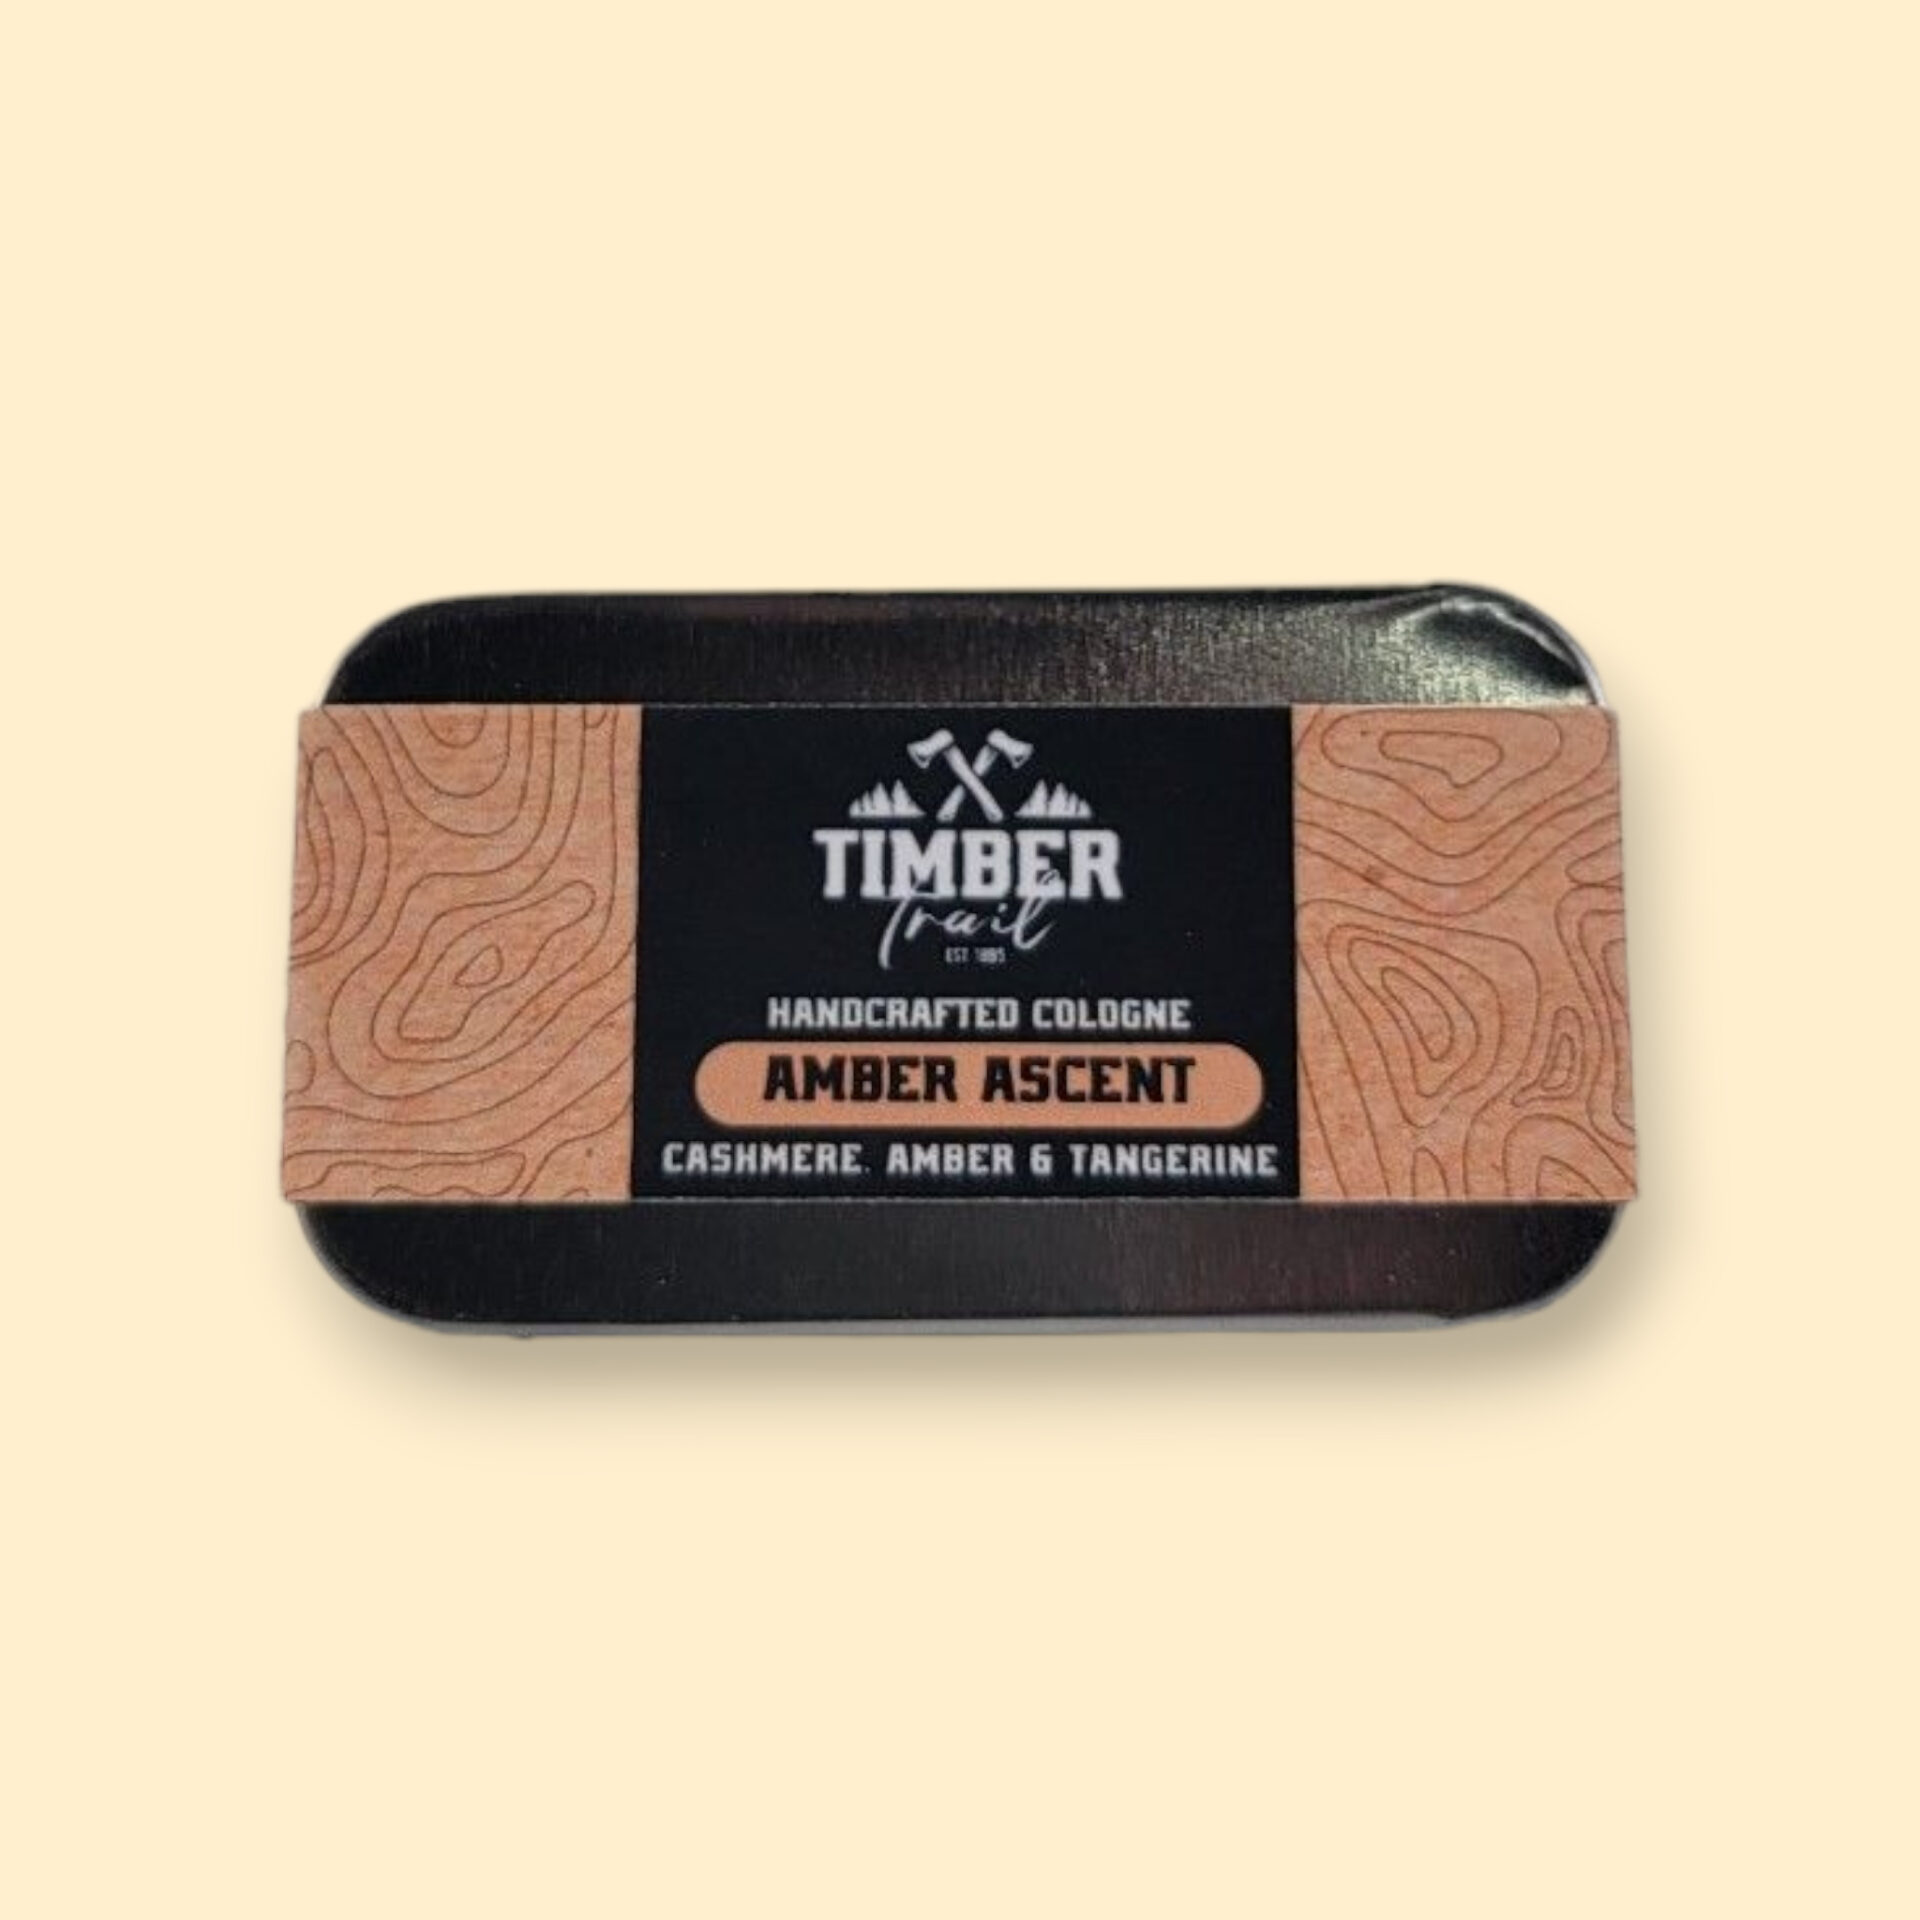 Amber Ascent Solid Cologne